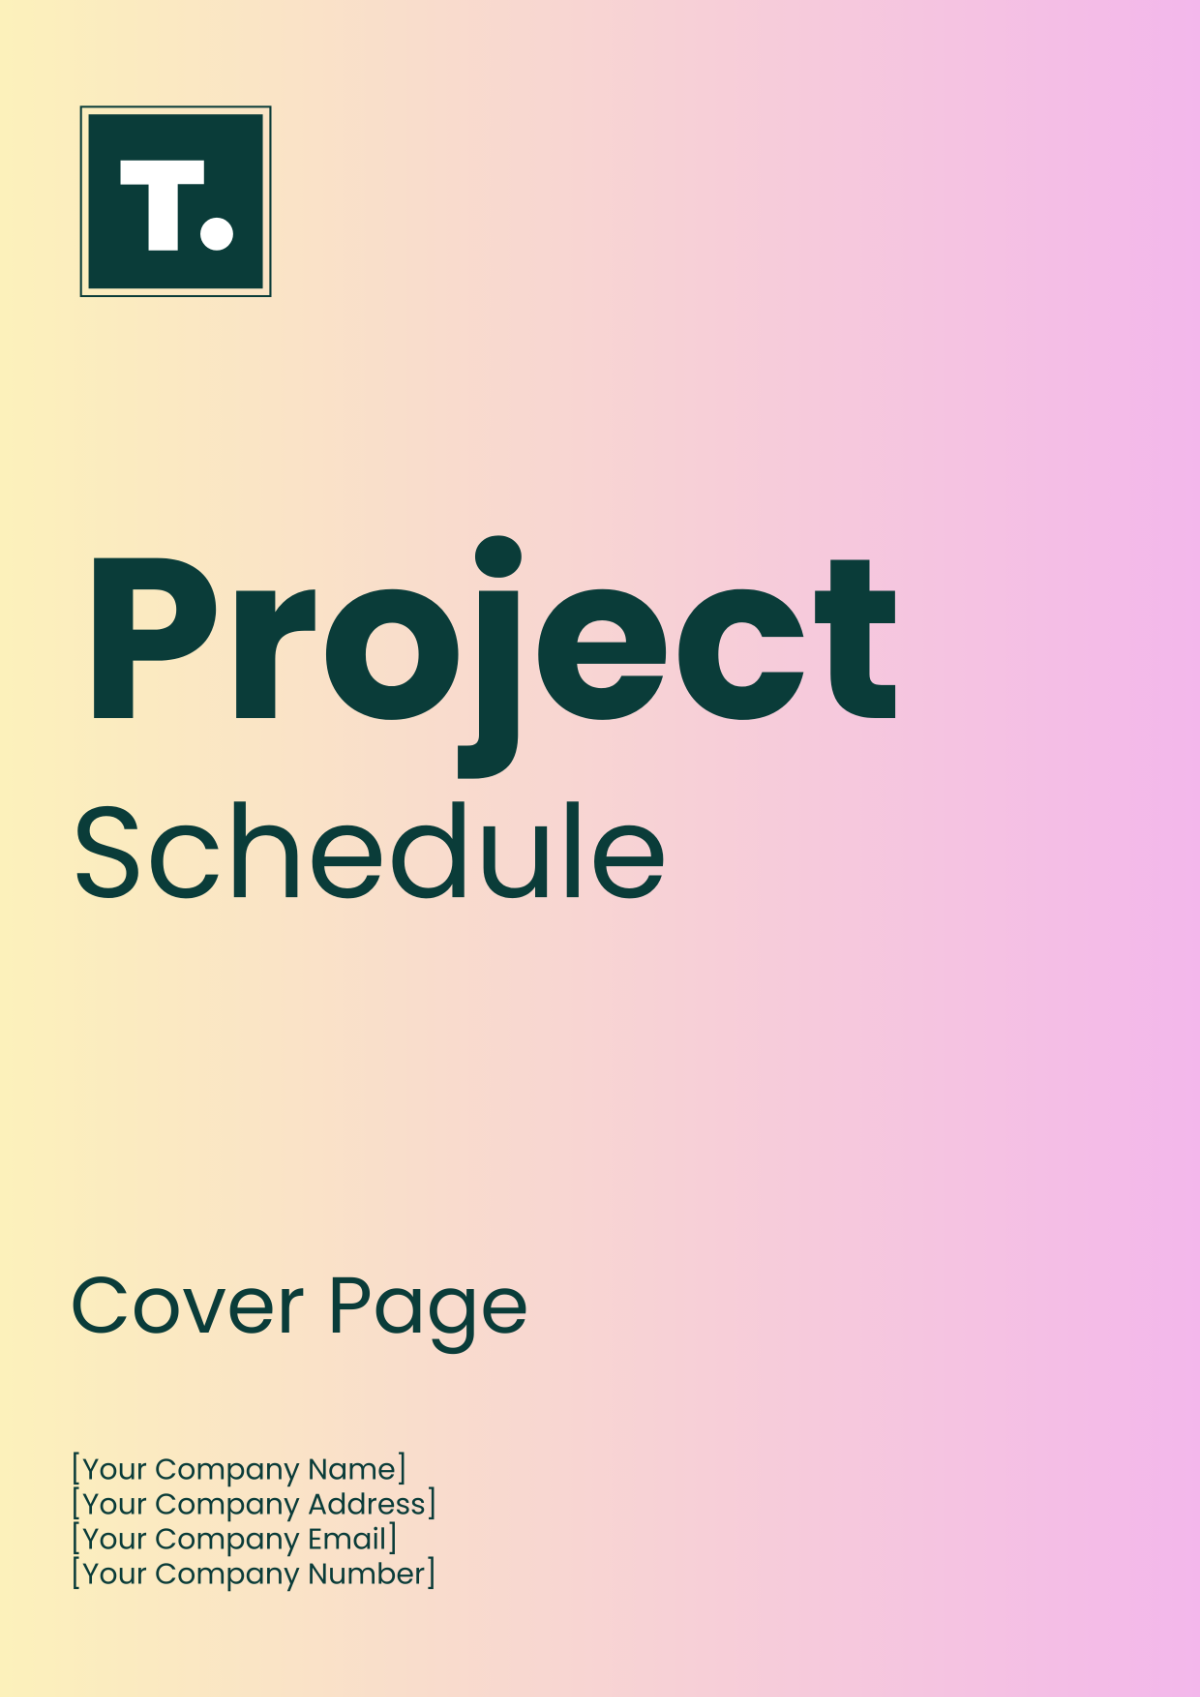 Project Schedule Cover Page